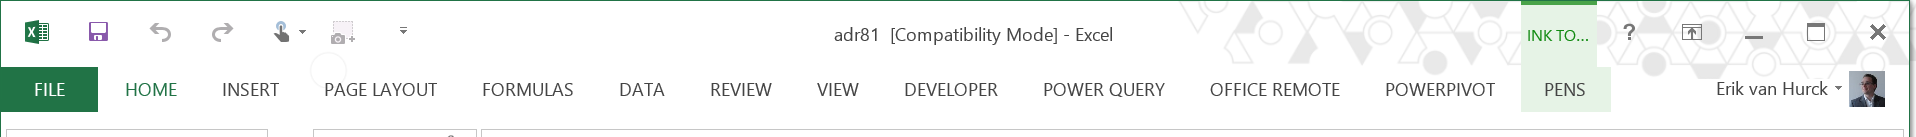 Compatibility mode Excel ribbon